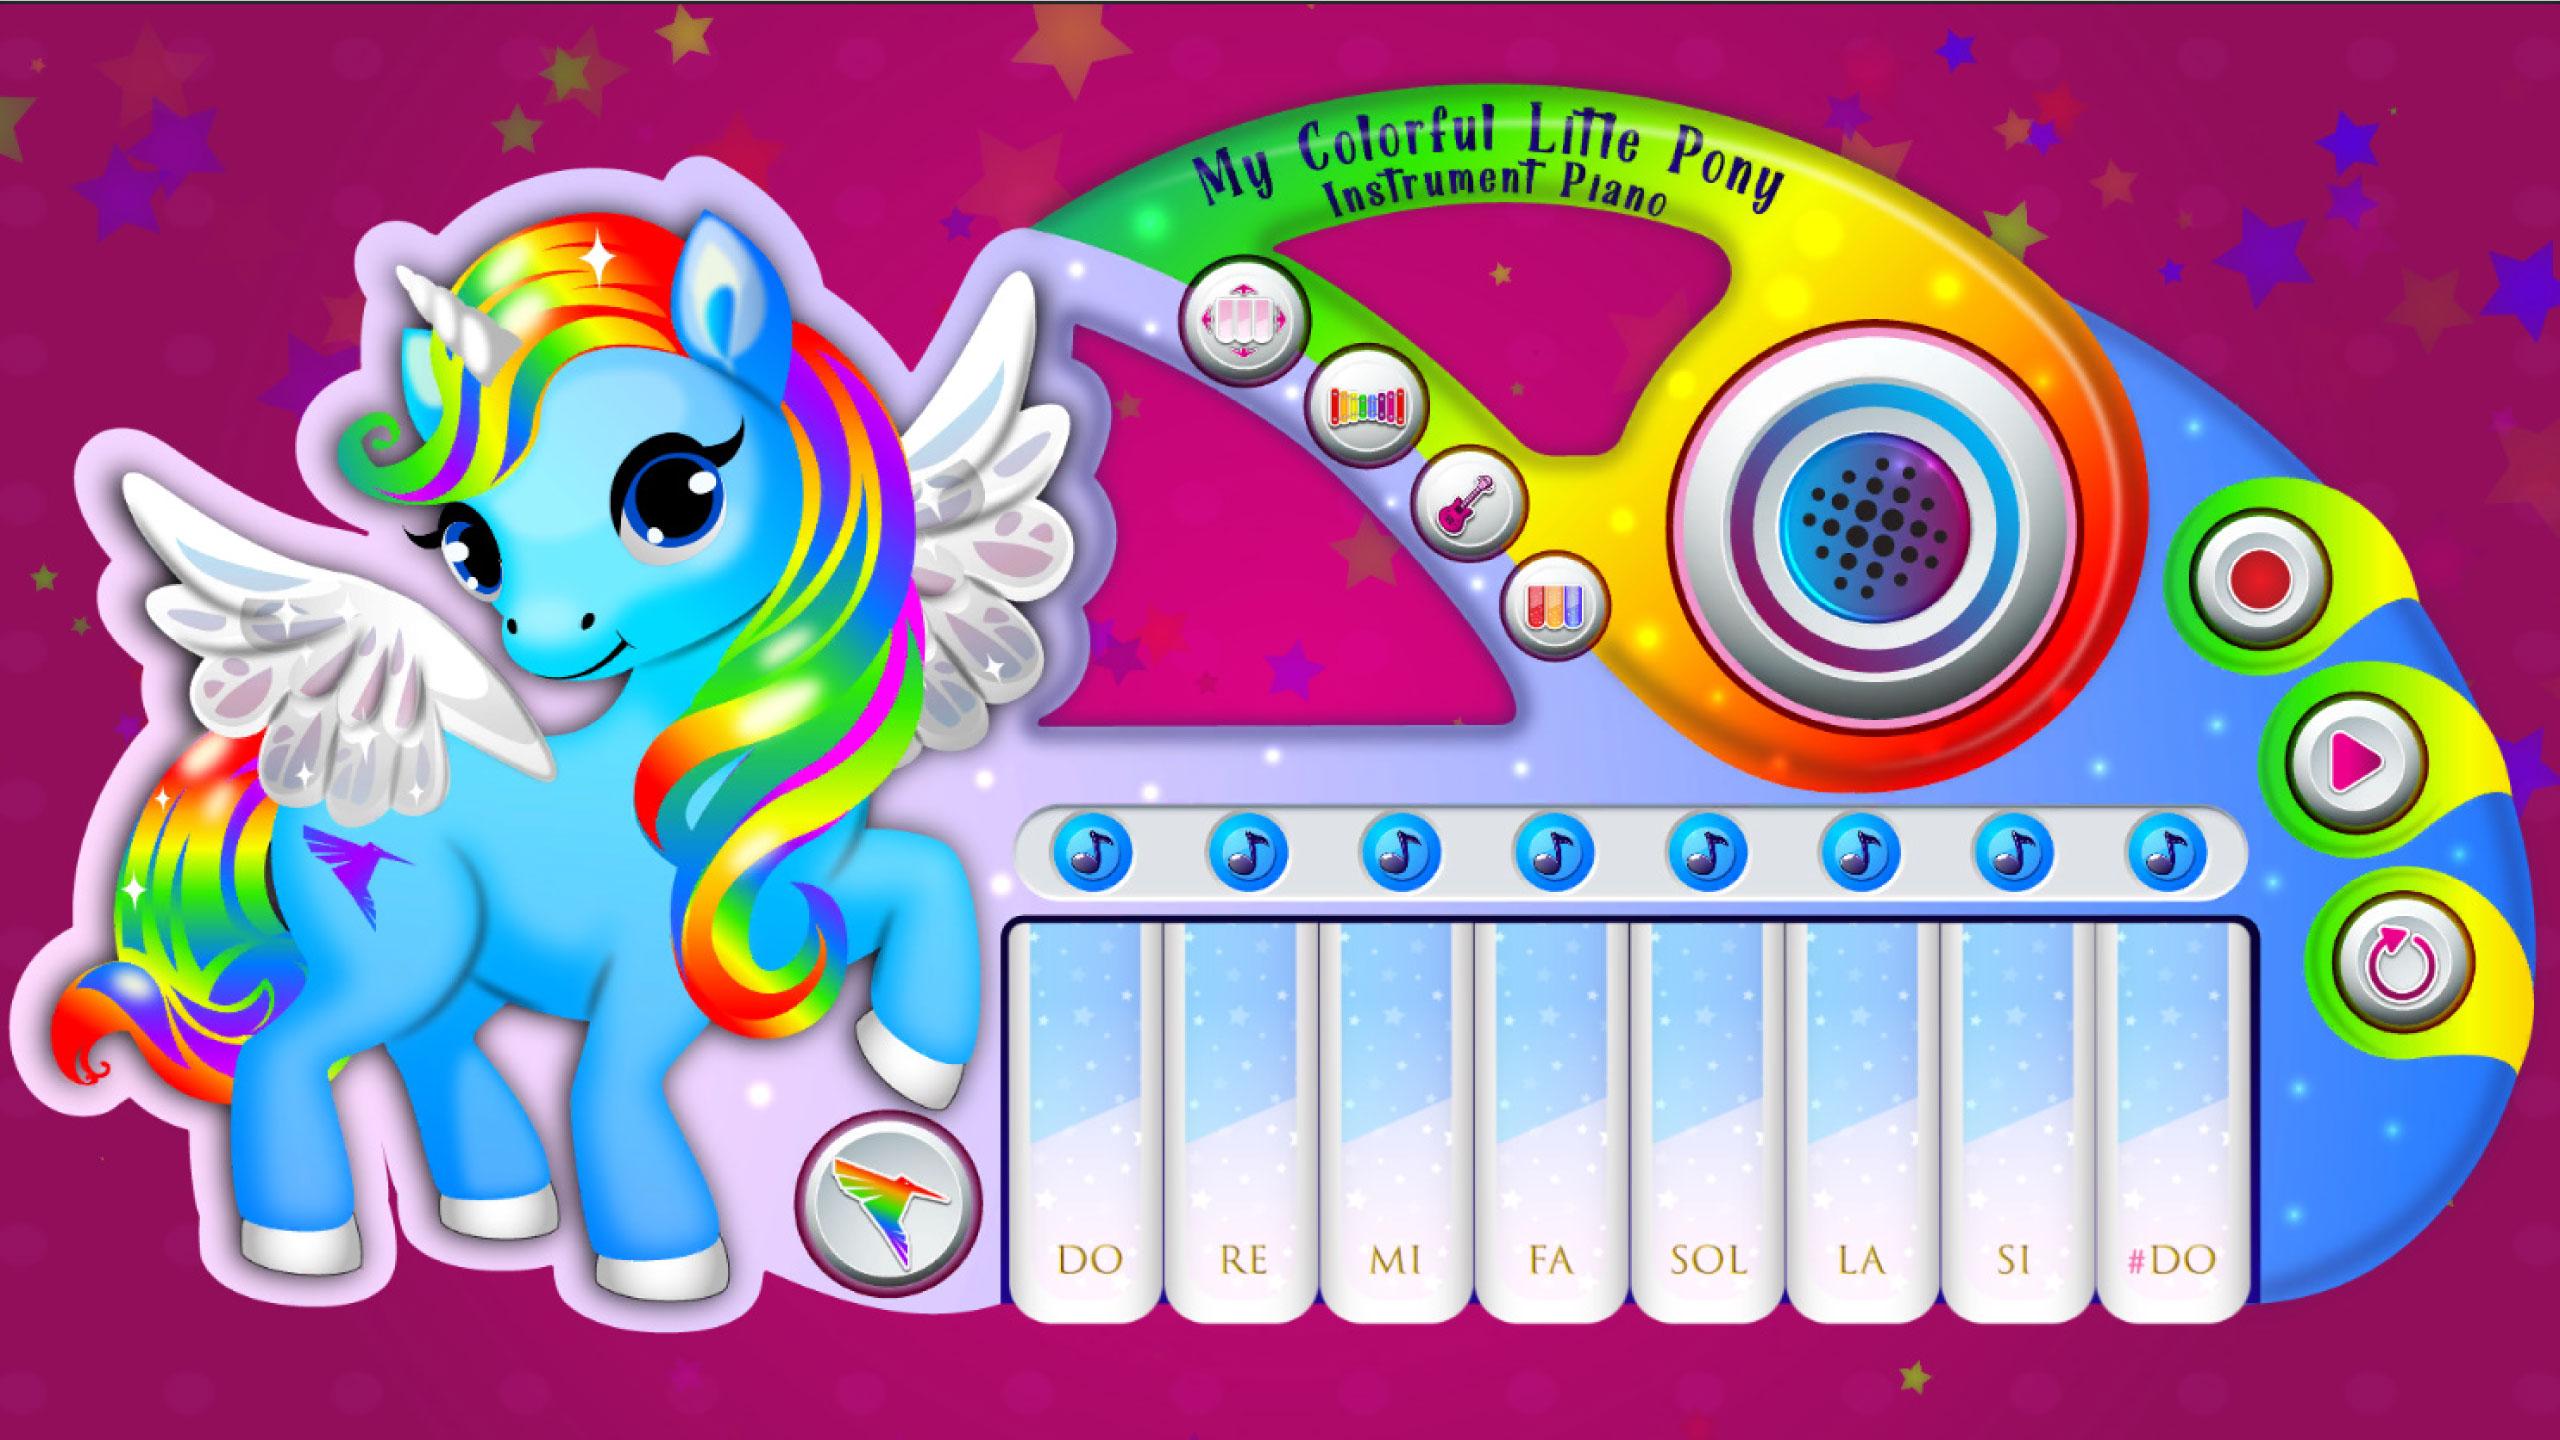 My Colorful Litle Pony Instrument - Piano 2.0 Screenshot 10